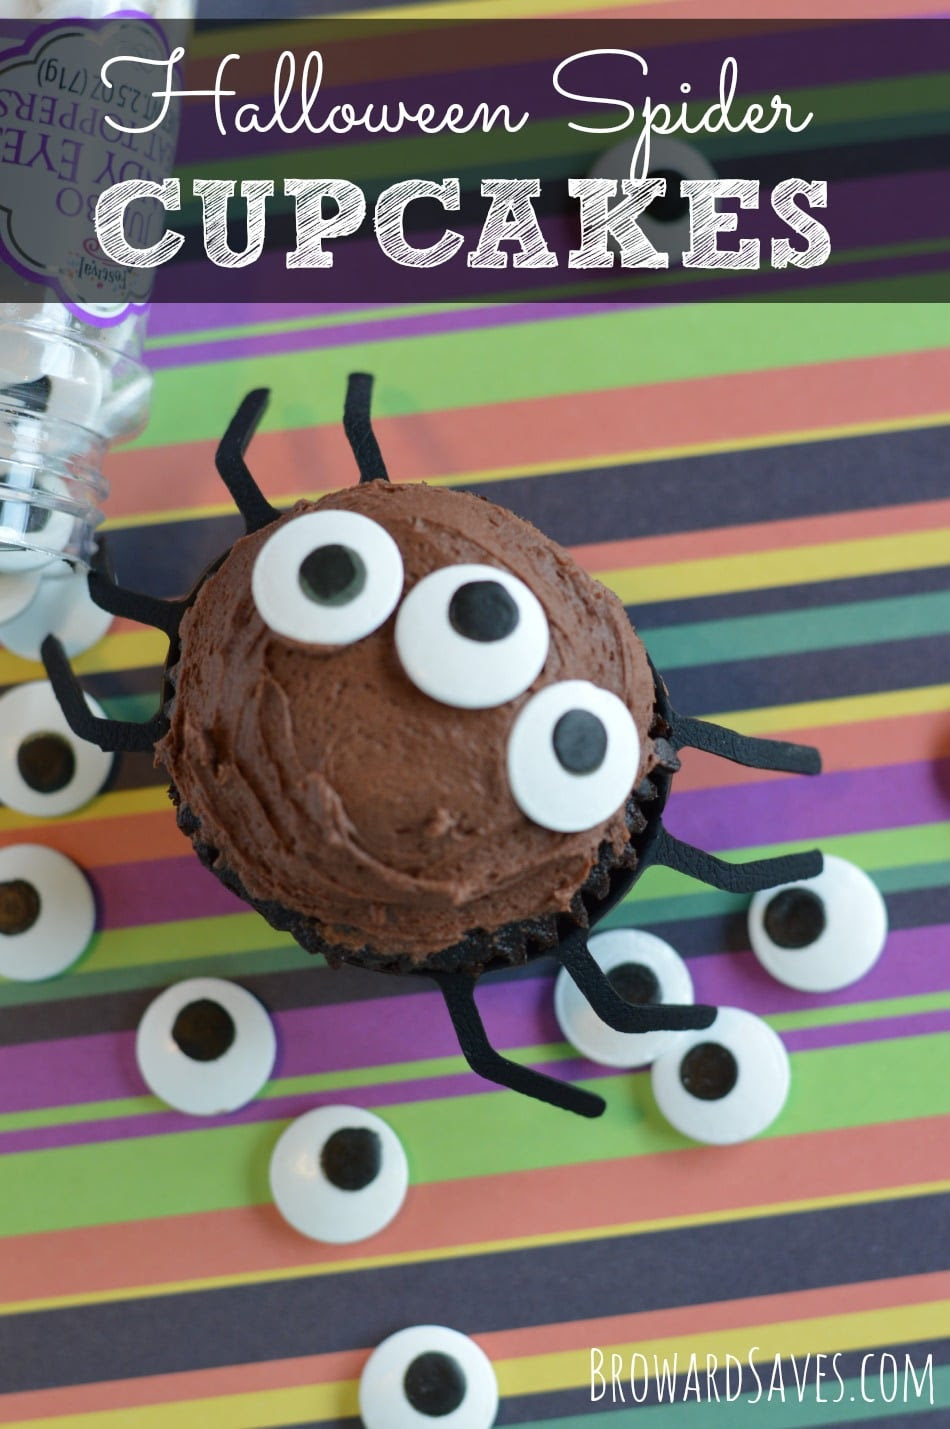 10-DIY-Halloween-Cupcakes-Ideas-IT-Movie-Clown-Britney-Dearest-Fun-Family-Party-Scary-Spooky-Spider-It-Movie-themed-Pumpkins-Monster-Alien-Bloody-Ghosts